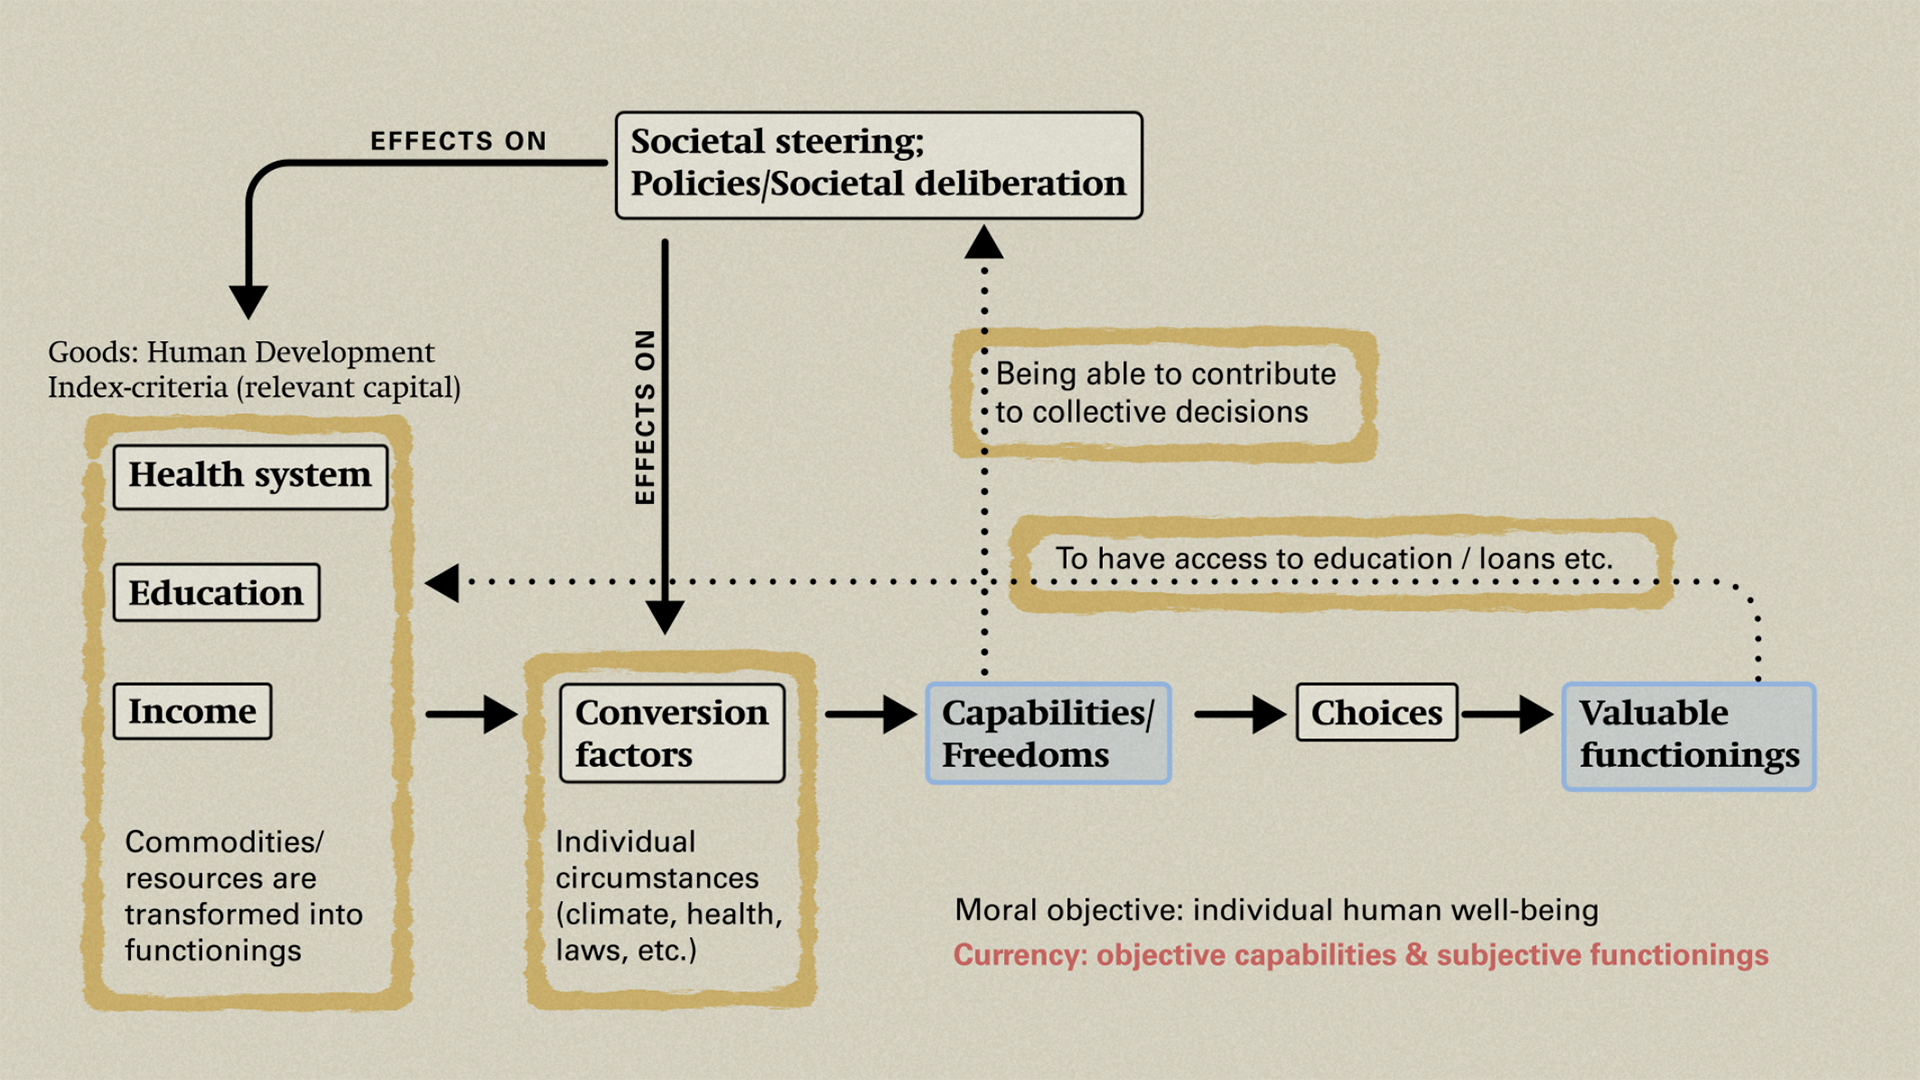 Diagram 1 shows the structural elements of the capability approach which displays the Human Development Index as a relevant input factor.